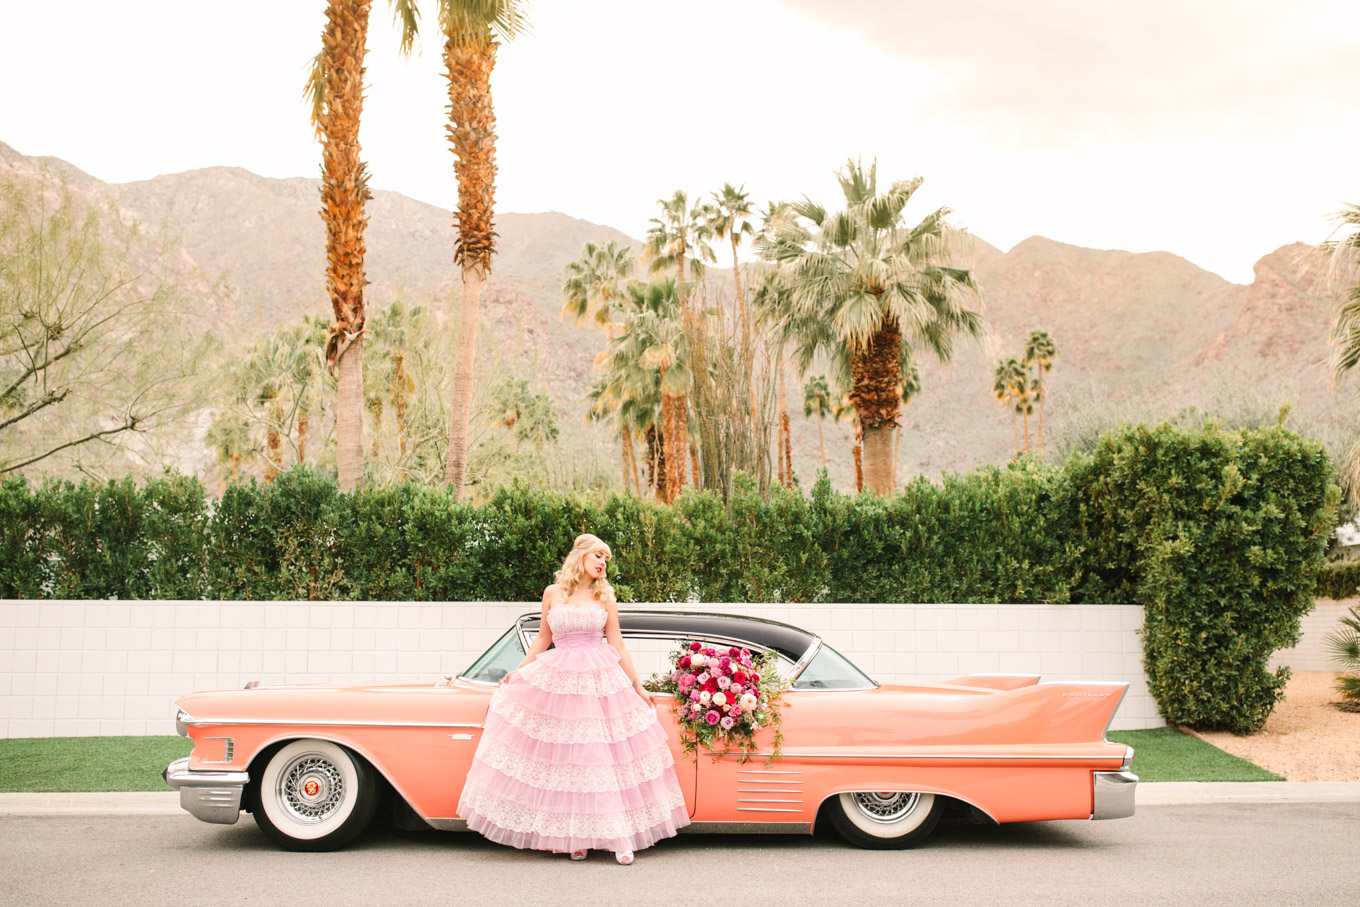 Bride with coral classic car. Modern vintage-inspired Palm Springs engagement session with a 1960s pink Cadillac, retro clothing, and flowers by Shindig Chic. | Colorful and elevated wedding inspiration for fun-loving couples in Southern California | #engagementsession #PalmSpringsengagement #vintageweddingdress #floralcar #pinkcar   Source: Mary Costa Photography | Los Angeles